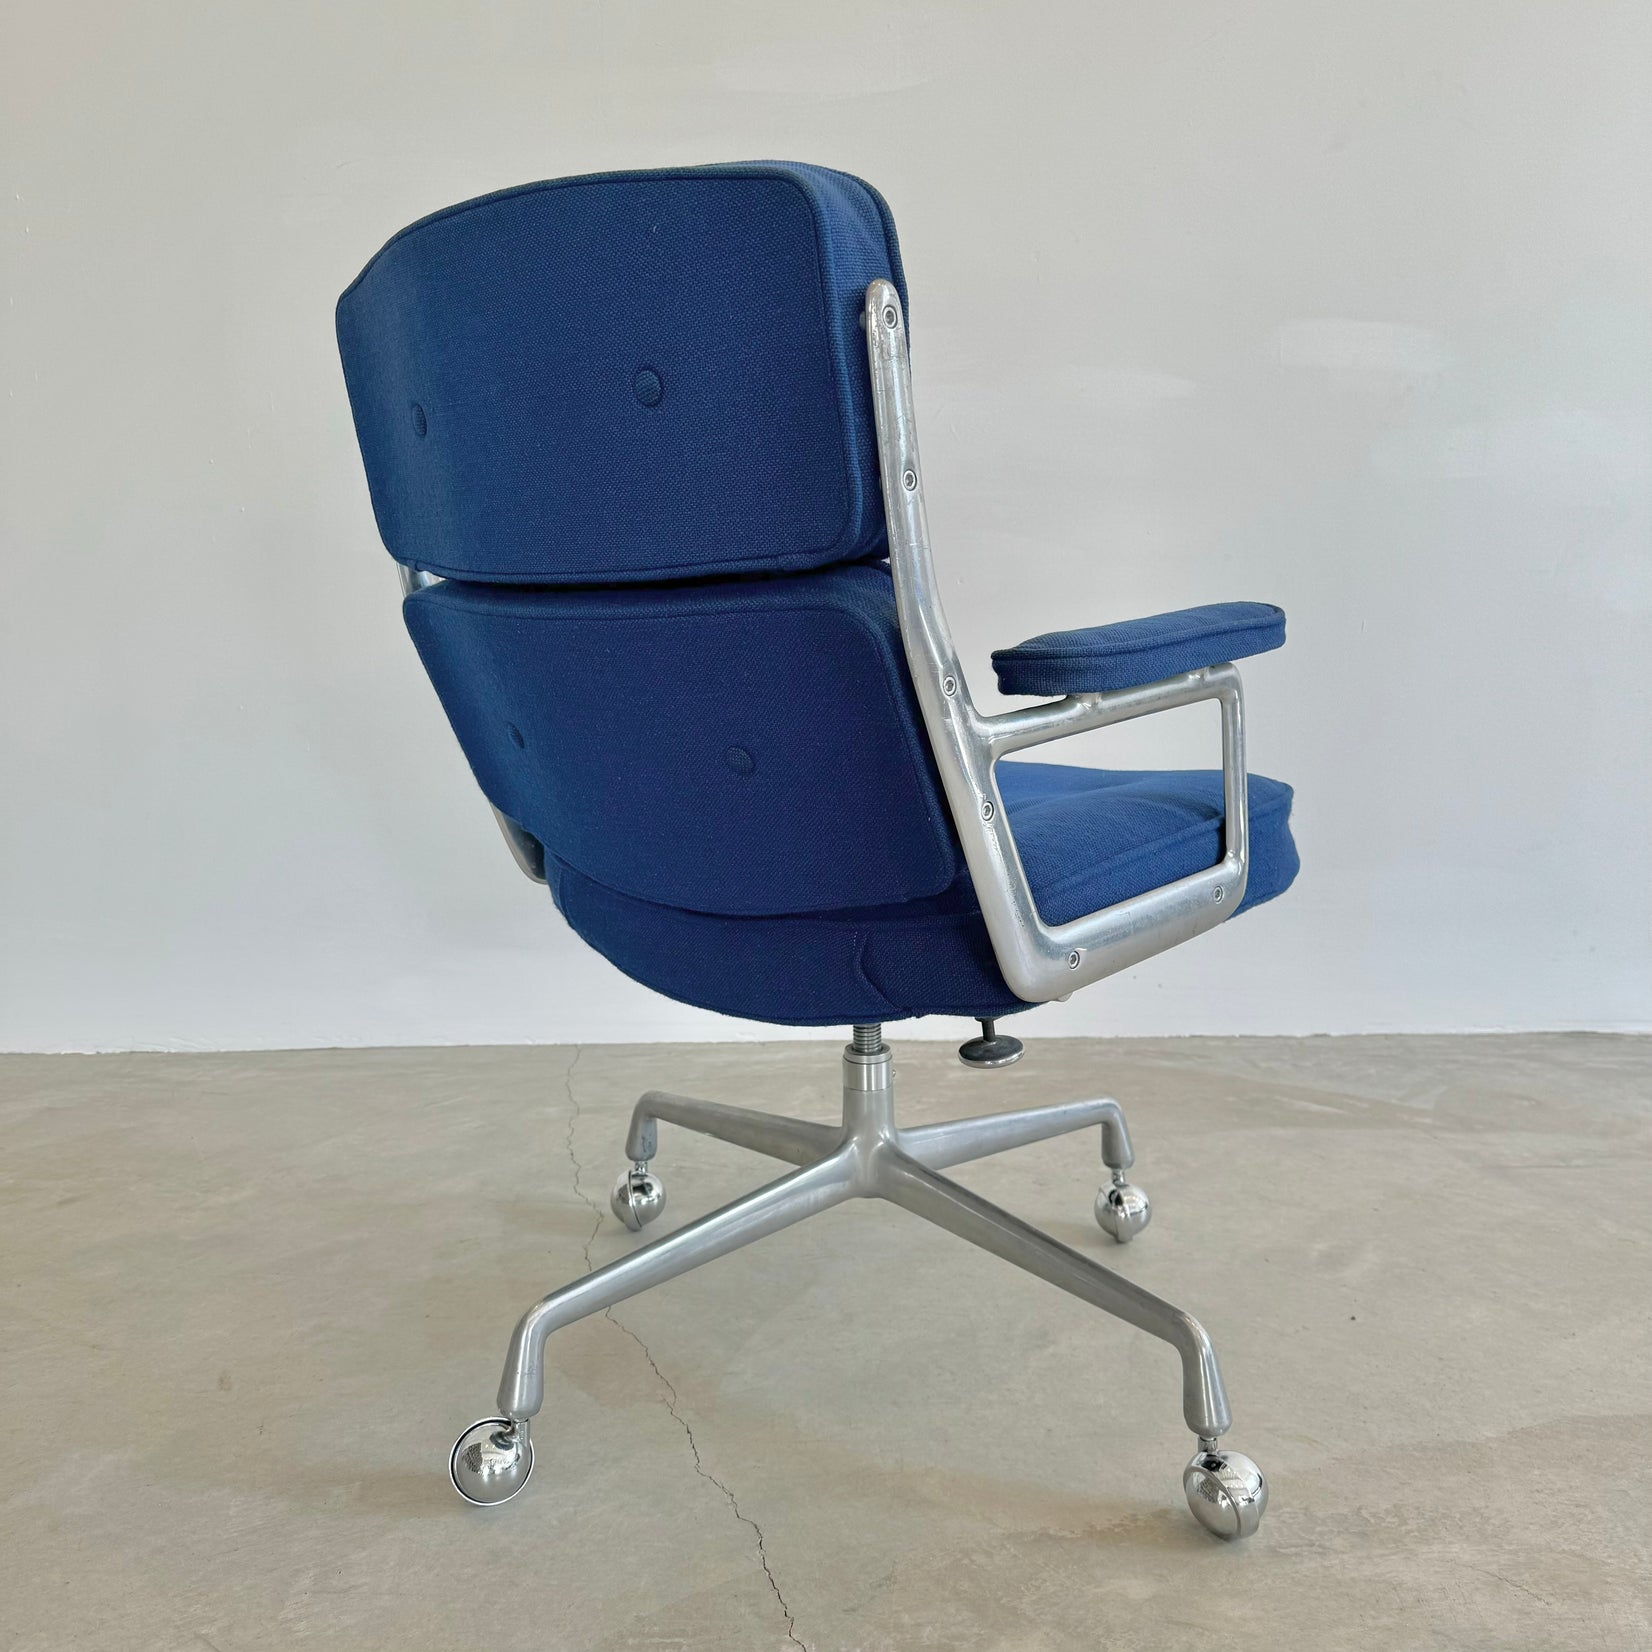 Eames Time Life Chair in Navy Blue Burlap for Herman Miller, 1978 USA